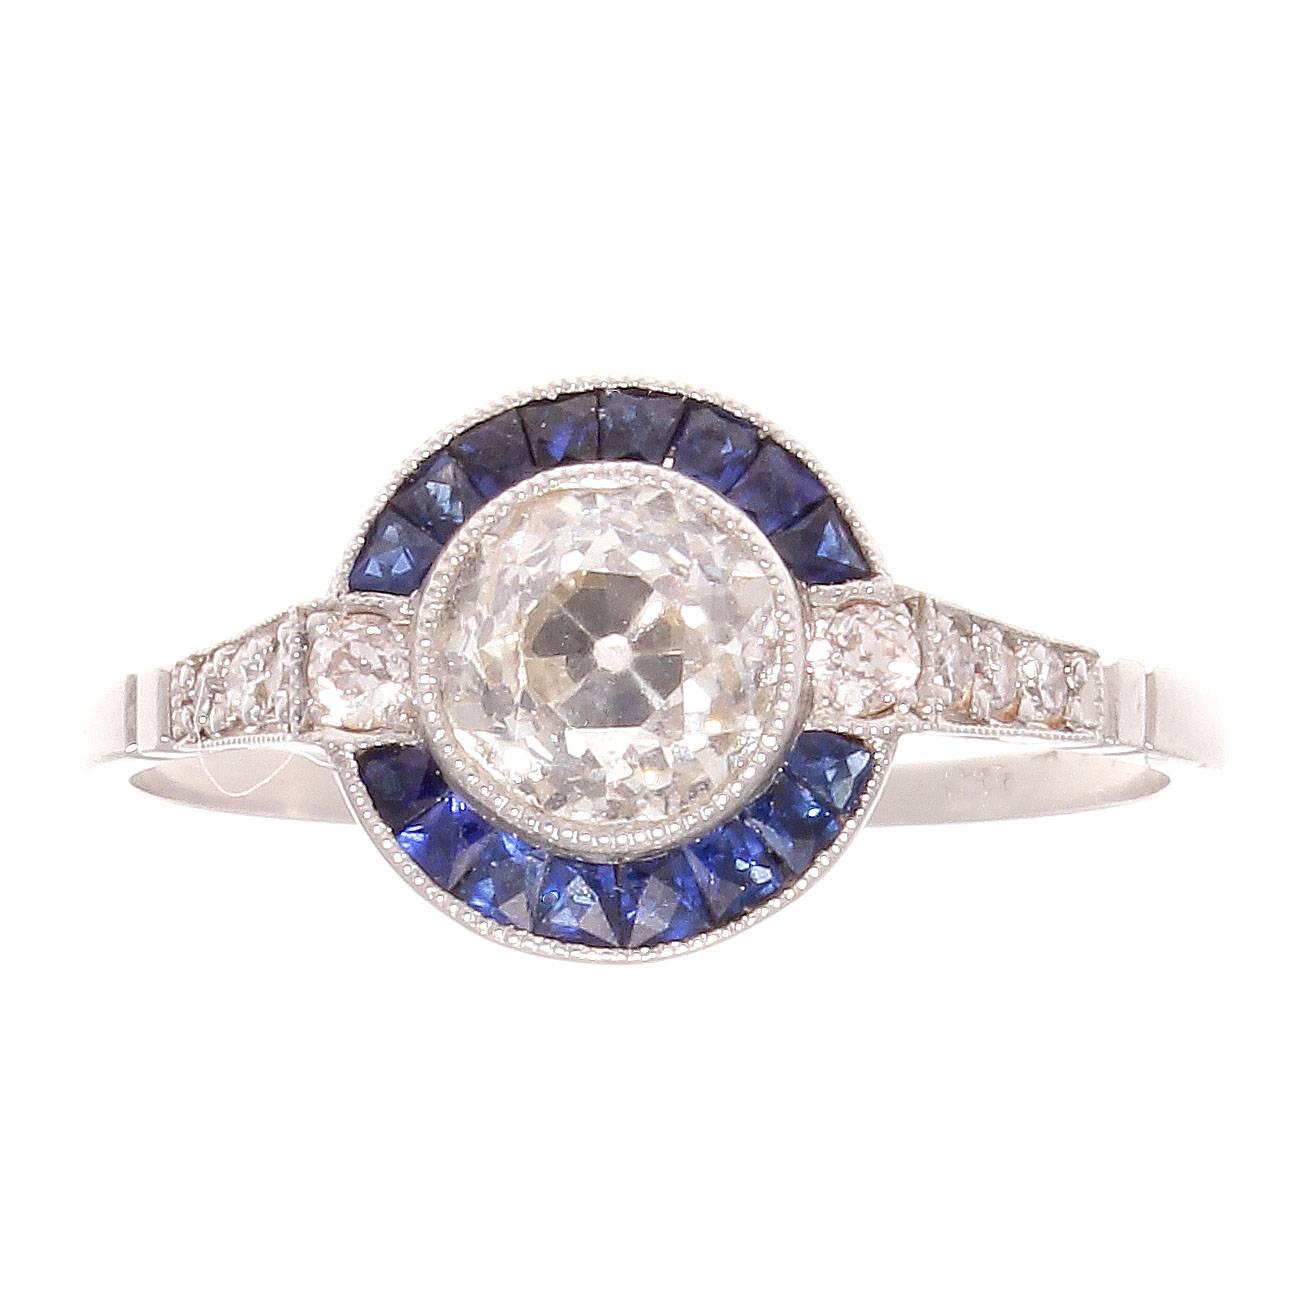 The 1930's is regarded as the golden age of jewelry and has influenced designers to recreate the jewelry from this remarkable time. Featuring an 0.86 carat diamond that is surrounded by a halo of navy blue sapphires. Hand crafted in platinum.
Ring